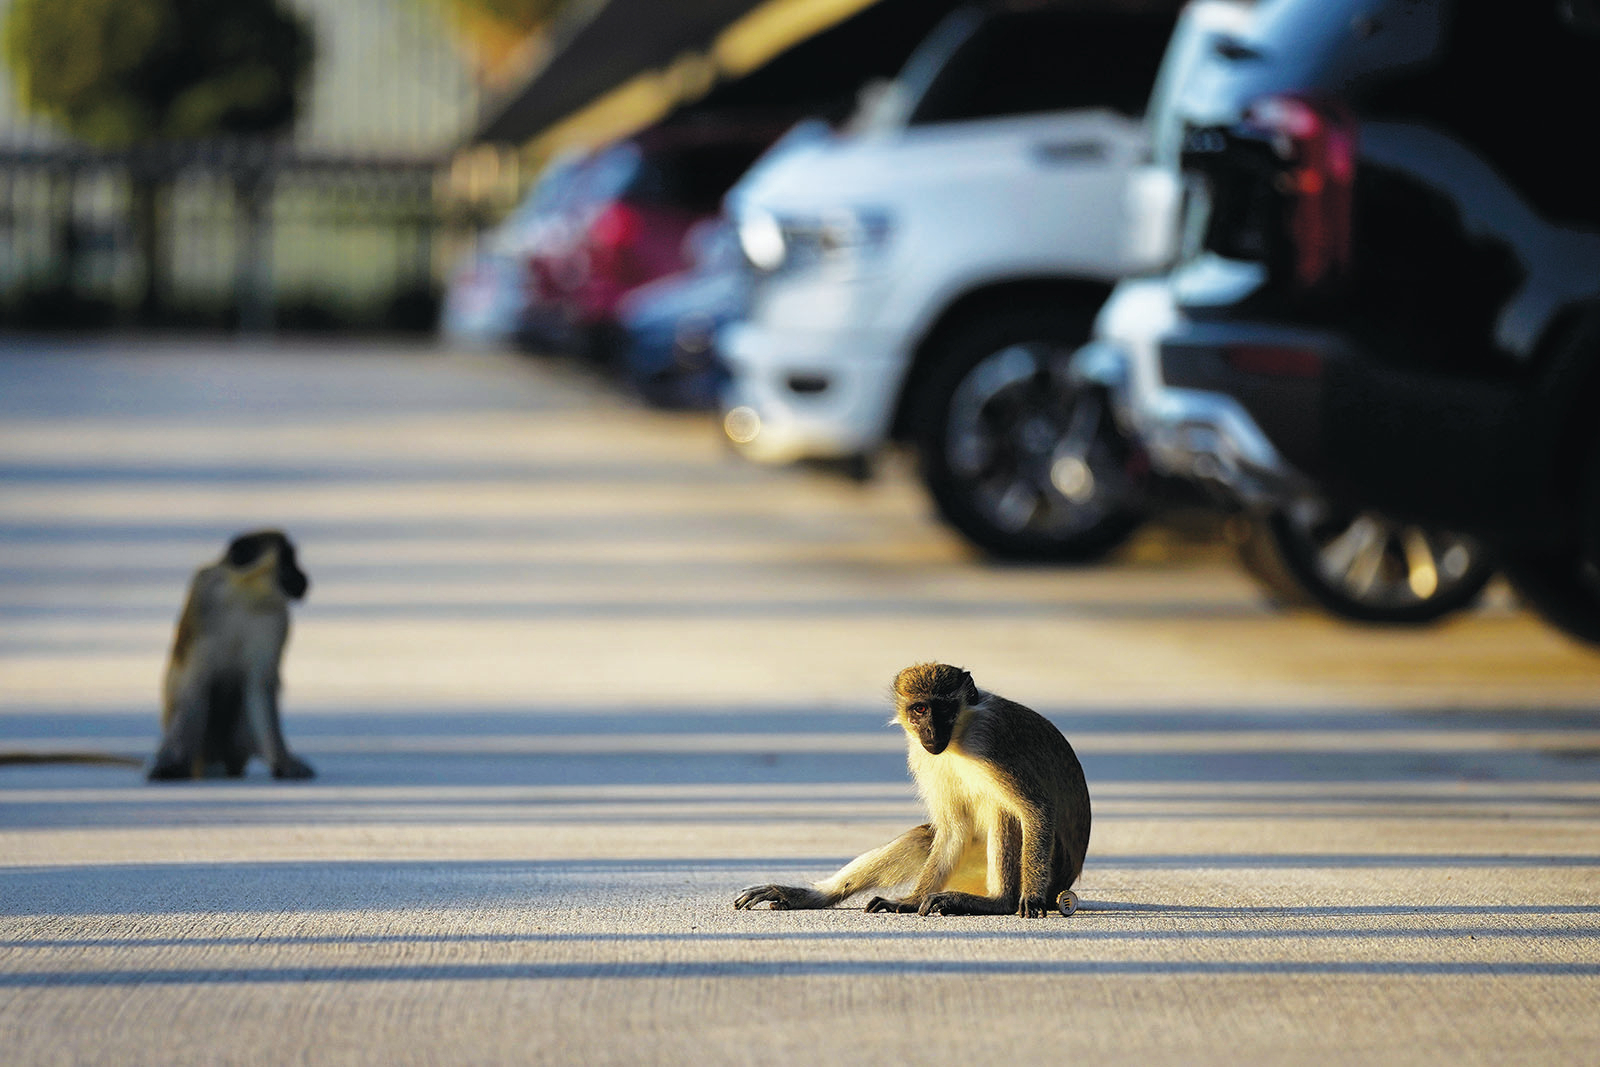 Colony of monkeys living in mangroves near Florida airport delight